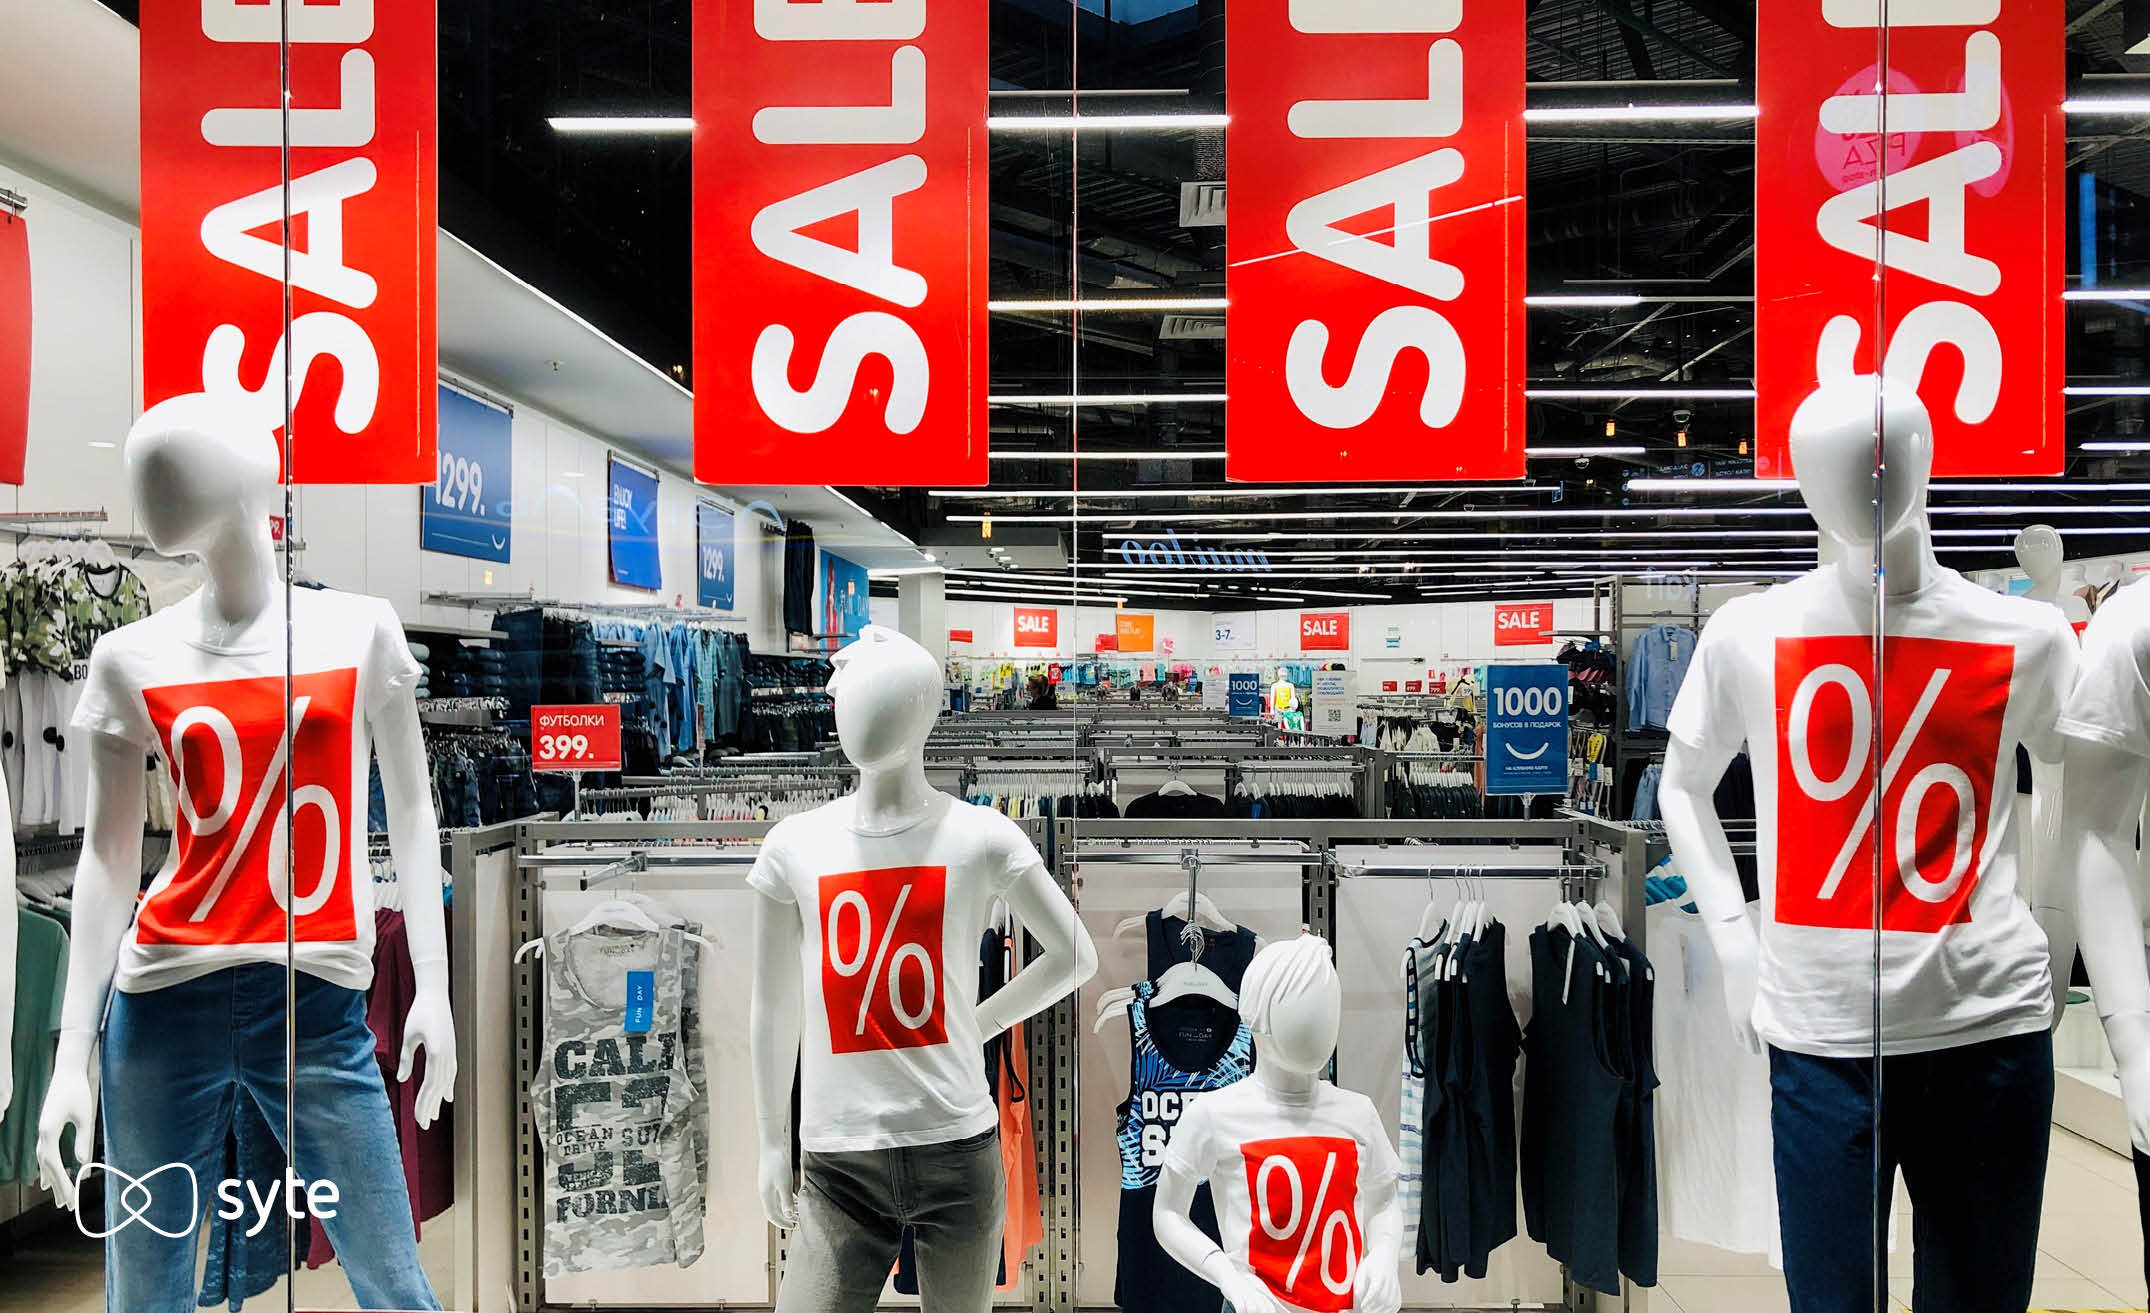 Black Friday sale signs in a store.